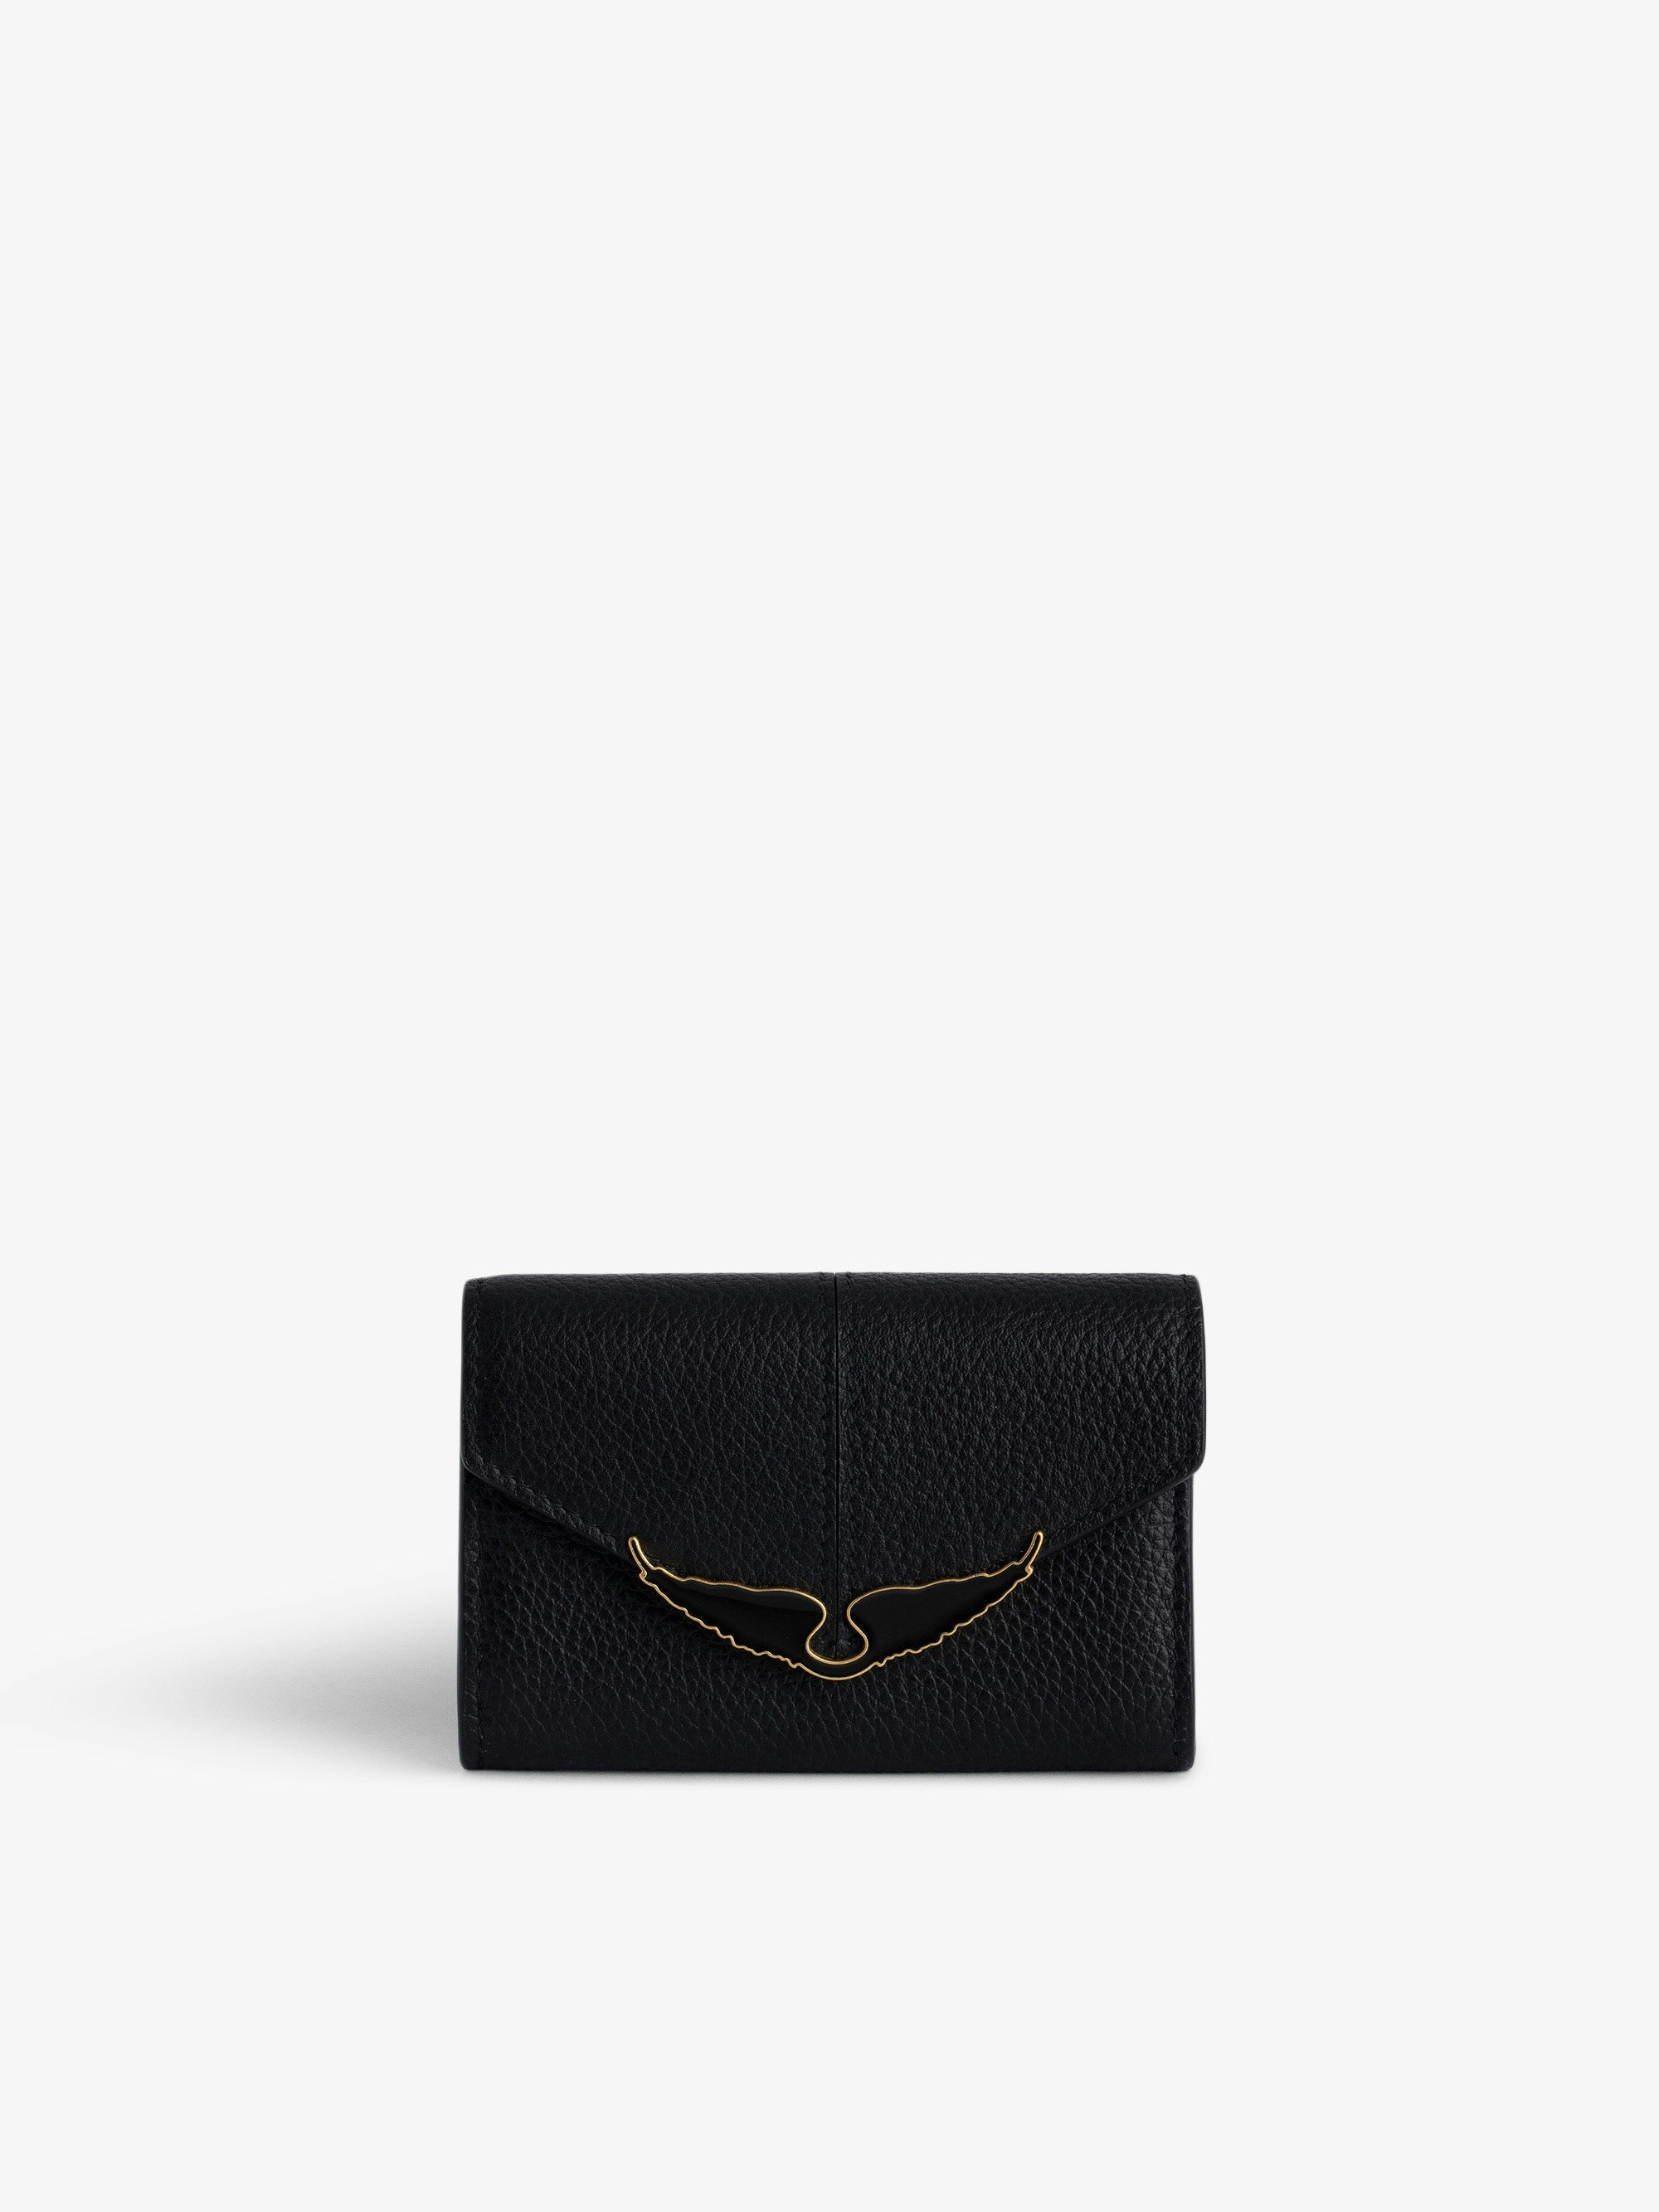 Borderline Wallet - Small black grained leather wallet with flap and lacquered wings.